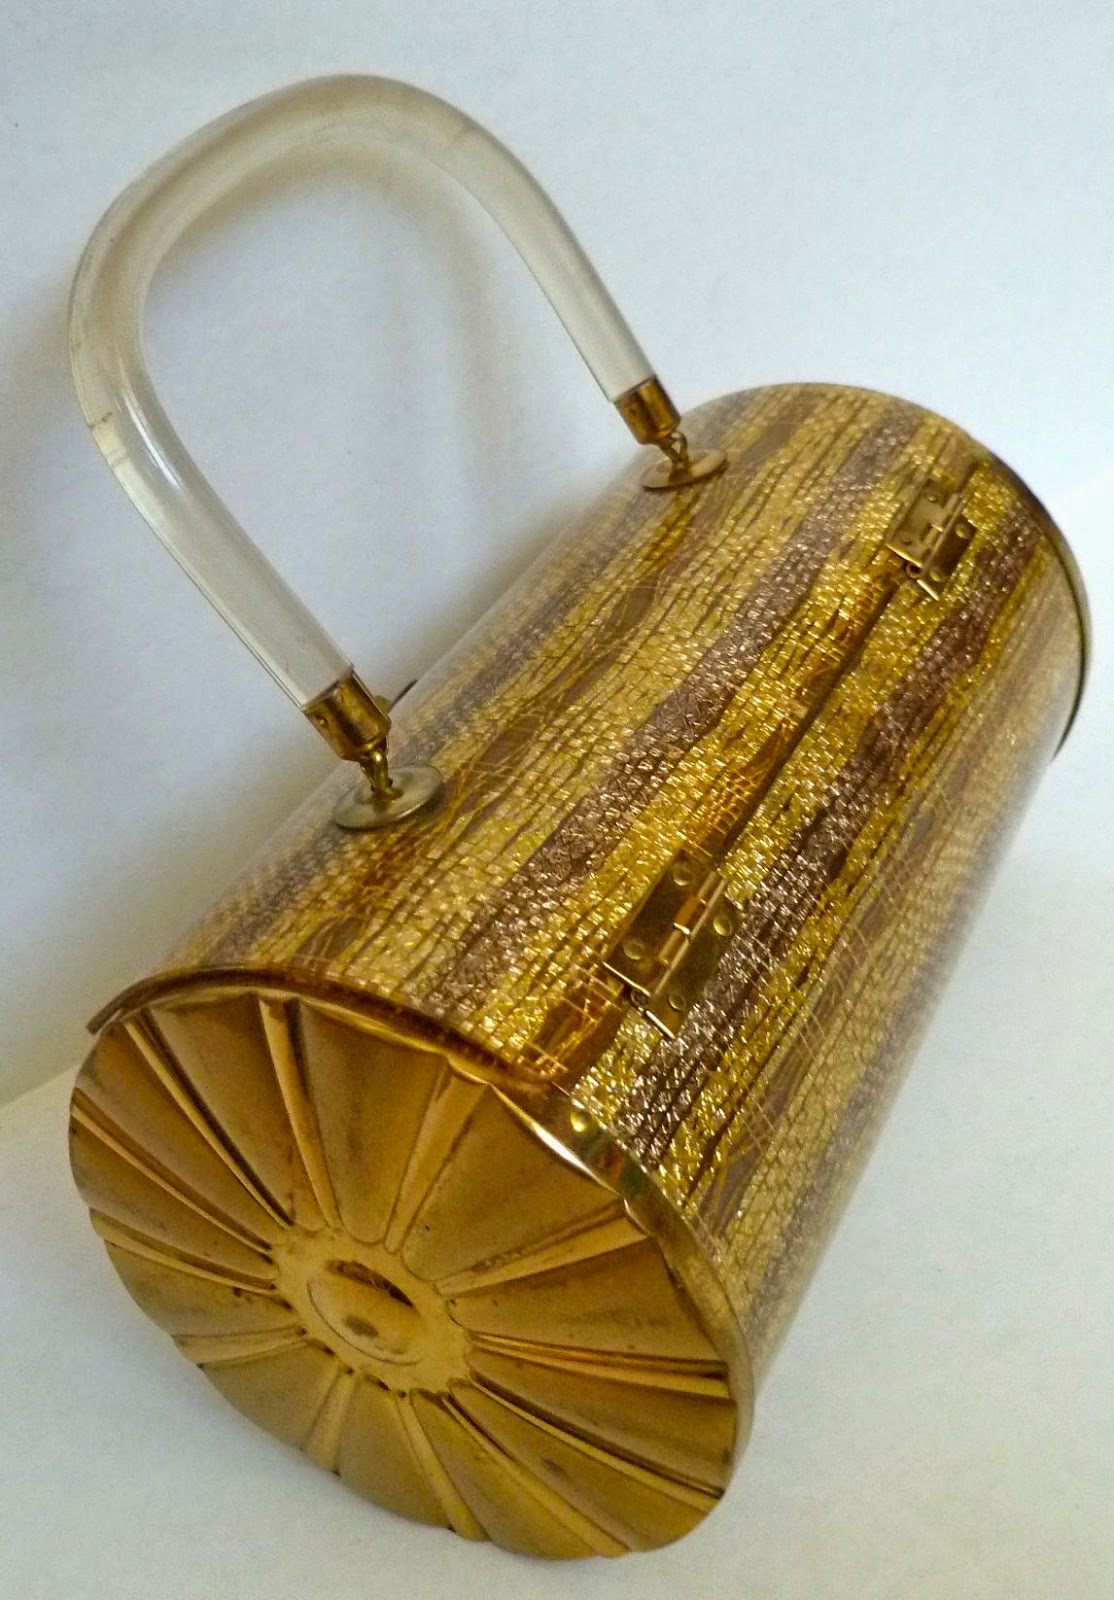 Vintage Purse a Day: Gold and Lucite Majestic Purse